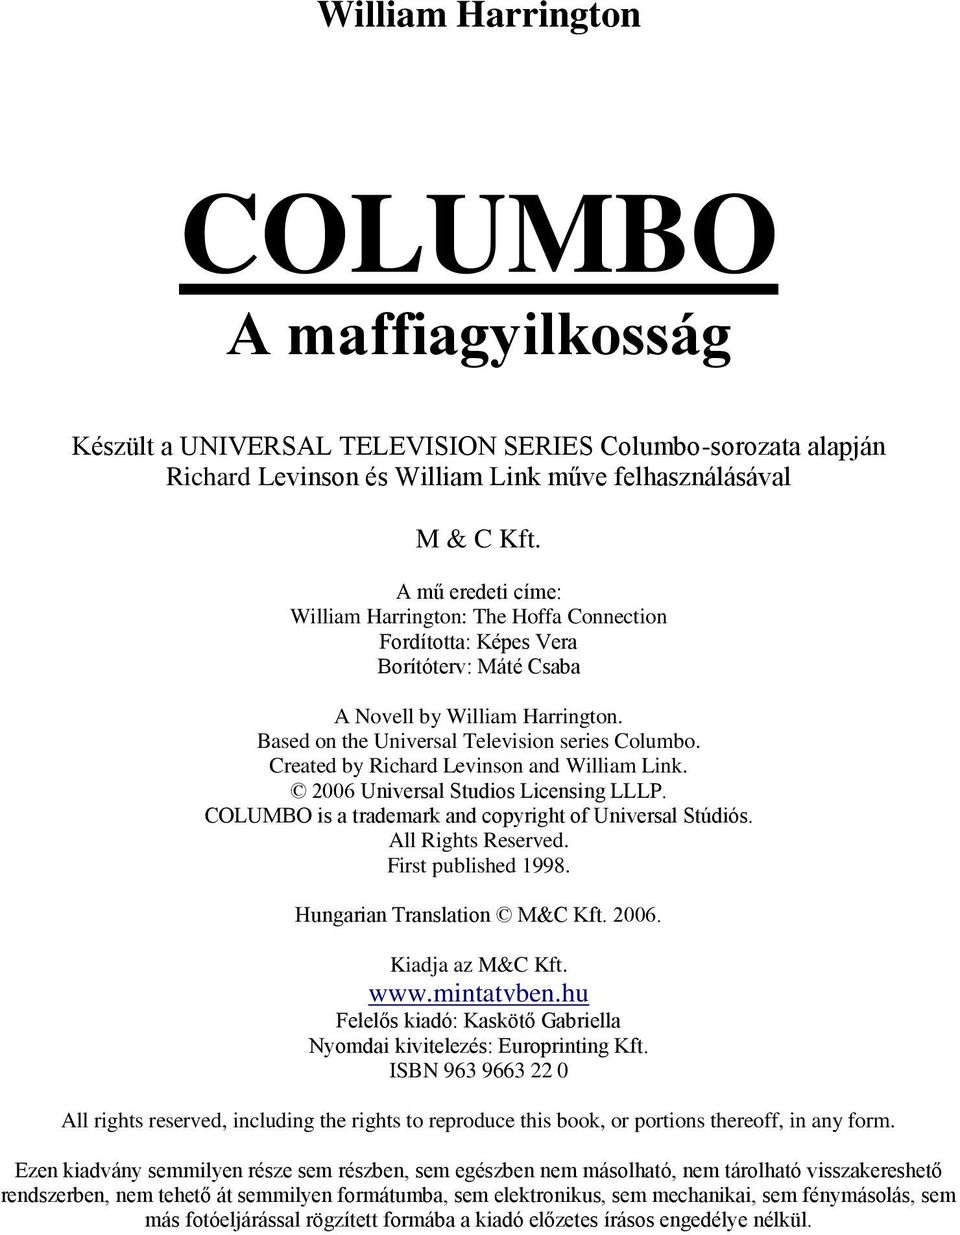 Created by Richard Levinson and William Link. 2006 Universal Studios Licensing LLLP. COLUMBO is a trademark and copyright of Universal Stúdiós. All Rights Reserved. First published 1998.